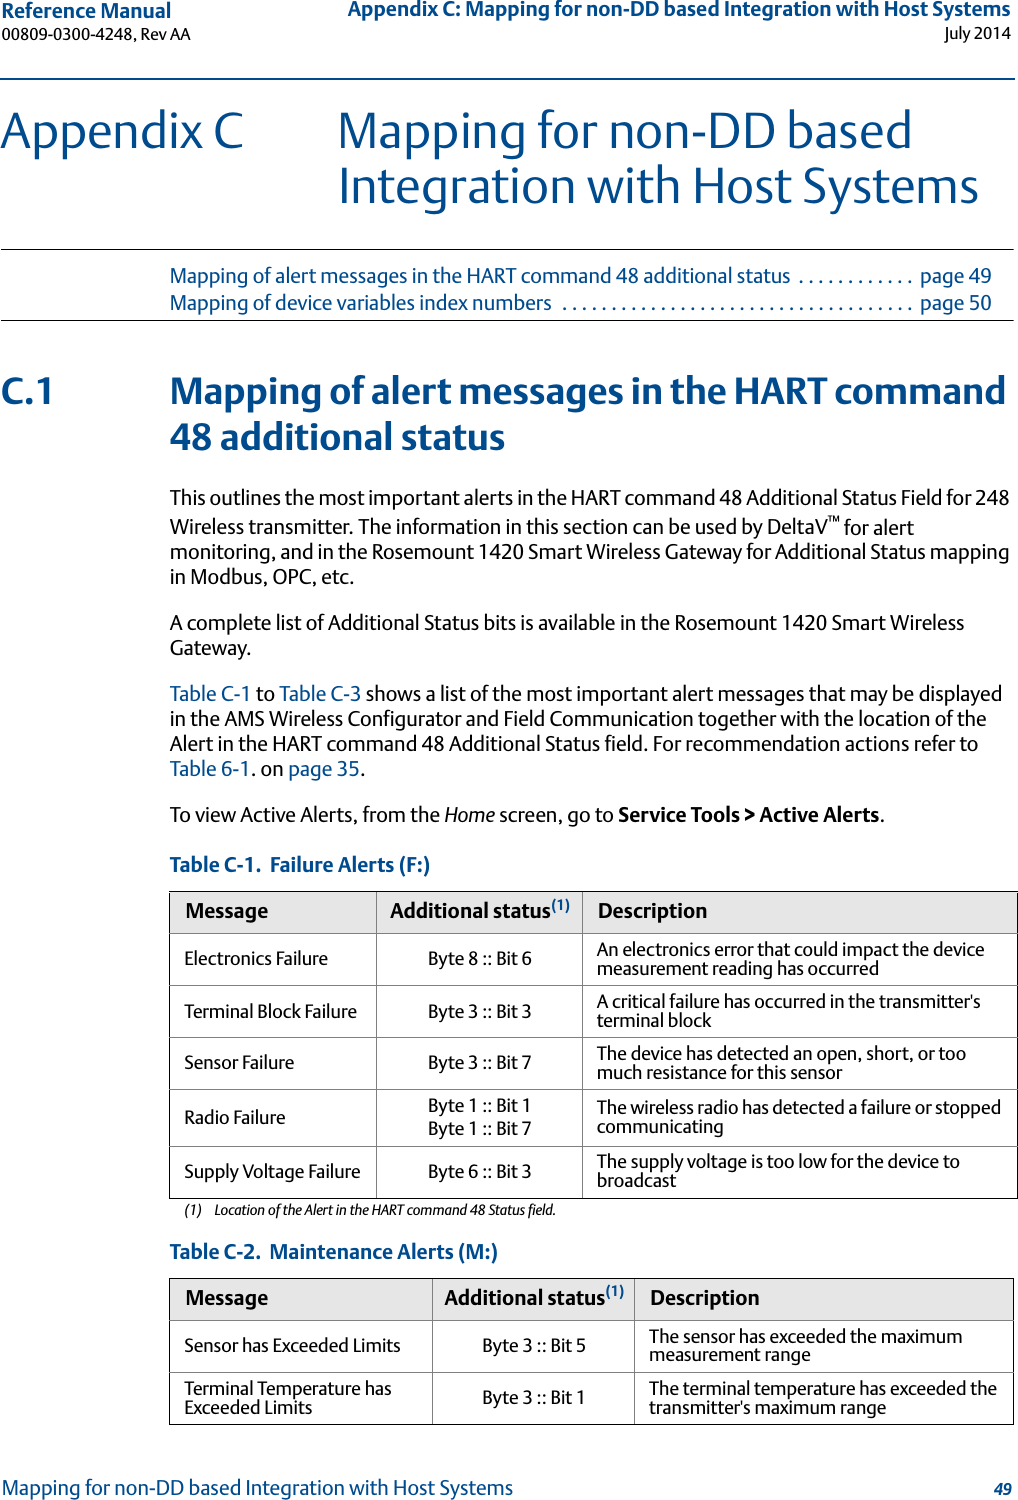 Reference Manual 00809-0300-4248, Rev AAAppendix C: Mapping for non-DD based Integration with Host SystemsJuly 201449Mapping for non-DD based Integration with Host SystemsAppendix C Mapping for non-DD based Integration with Host SystemsMapping of alert messages in the HART command 48 additional status  . . . . . . . . . . . .  page 49Mapping of device variables index numbers  . . . . . . . . . . . . . . . . . . . . . . . . . . . . . . . . . . . .  page 50C.1 Mapping of alert messages in the HART command 48 additional statusThis outlines the most important alerts in the HART command 48 Additional Status Field for 248 Wireless transmitter. The information in this section can be used by DeltaV™ for alert monitoring, and in the Rosemount 1420 Smart Wireless Gateway for Additional Status mapping in Modbus, OPC, etc.A complete list of Additional Status bits is available in the Rosemount 1420 Smart Wireless Gateway.Table C-1 to Table C-3 shows a list of the most important alert messages that may be displayed in the AMS Wireless Configurator and Field Communication together with the location of the Alert in the HART command 48 Additional Status field. For recommendation actions refer to Table 6-1. on page 35.To view Active Alerts, from the Home screen, go to Service Tools &gt; Active Alerts.Table C-1.  Failure Alerts (F:)Message Additional status(1)(1) Location of the Alert in the HART command 48 Status field.DescriptionElectronics Failure Byte 8 :: Bit 6 An electronics error that could impact the device measurement reading has occurredTerminal Block Failure Byte 3 :: Bit 3 A critical failure has occurred in the transmitter&apos;s terminal blockSensor Failure Byte 3 :: Bit 7 The device has detected an open, short, or too much resistance for this sensorRadio Failure Byte 1 :: Bit 1Byte 1 :: Bit 7The wireless radio has detected a failure or stopped communicatingSupply Voltage Failure Byte 6 :: Bit 3 The supply voltage is too low for the device to broadcastTable C-2.  Maintenance Alerts (M:)Message Additional status(1) DescriptionSensor has Exceeded Limits Byte 3 :: Bit 5 The sensor has exceeded the maximum measurement rangeTerminal Temperature has Exceeded Limits Byte 3 :: Bit 1 The terminal temperature has exceeded the transmitter&apos;s maximum range